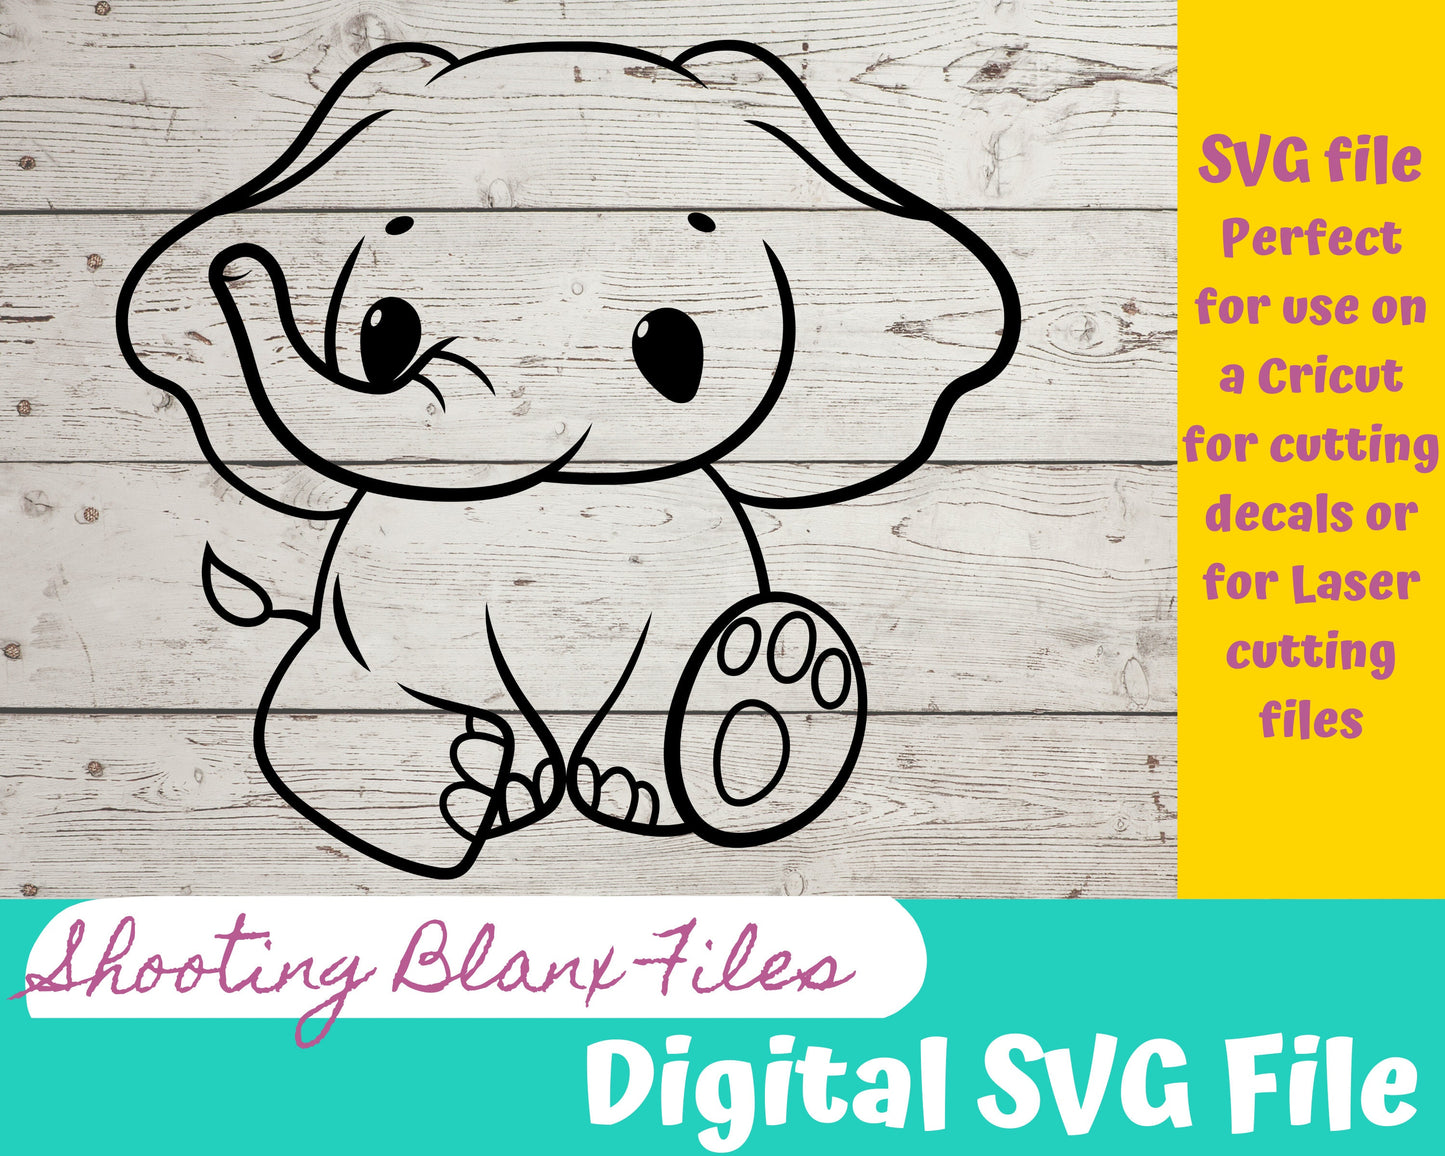 Elephant baby SVG bundle file perfect for Cricut, Cameo, or Silhouette also engraving Glowforge, baby shower